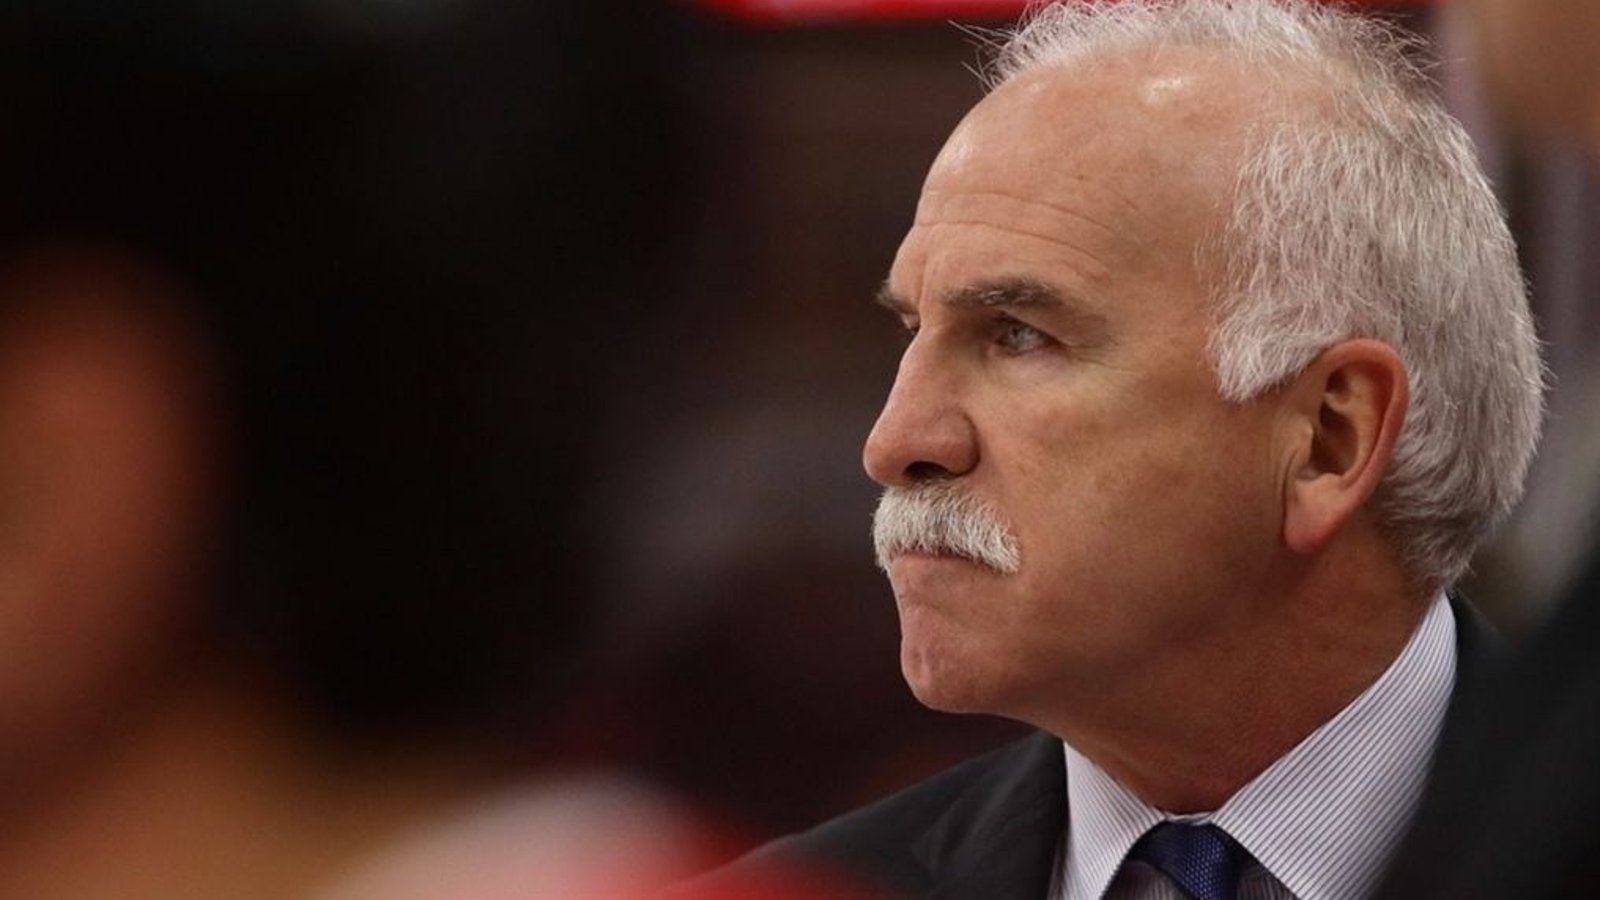 Breaking: Details revealed on what Quenneville plans to do next! 